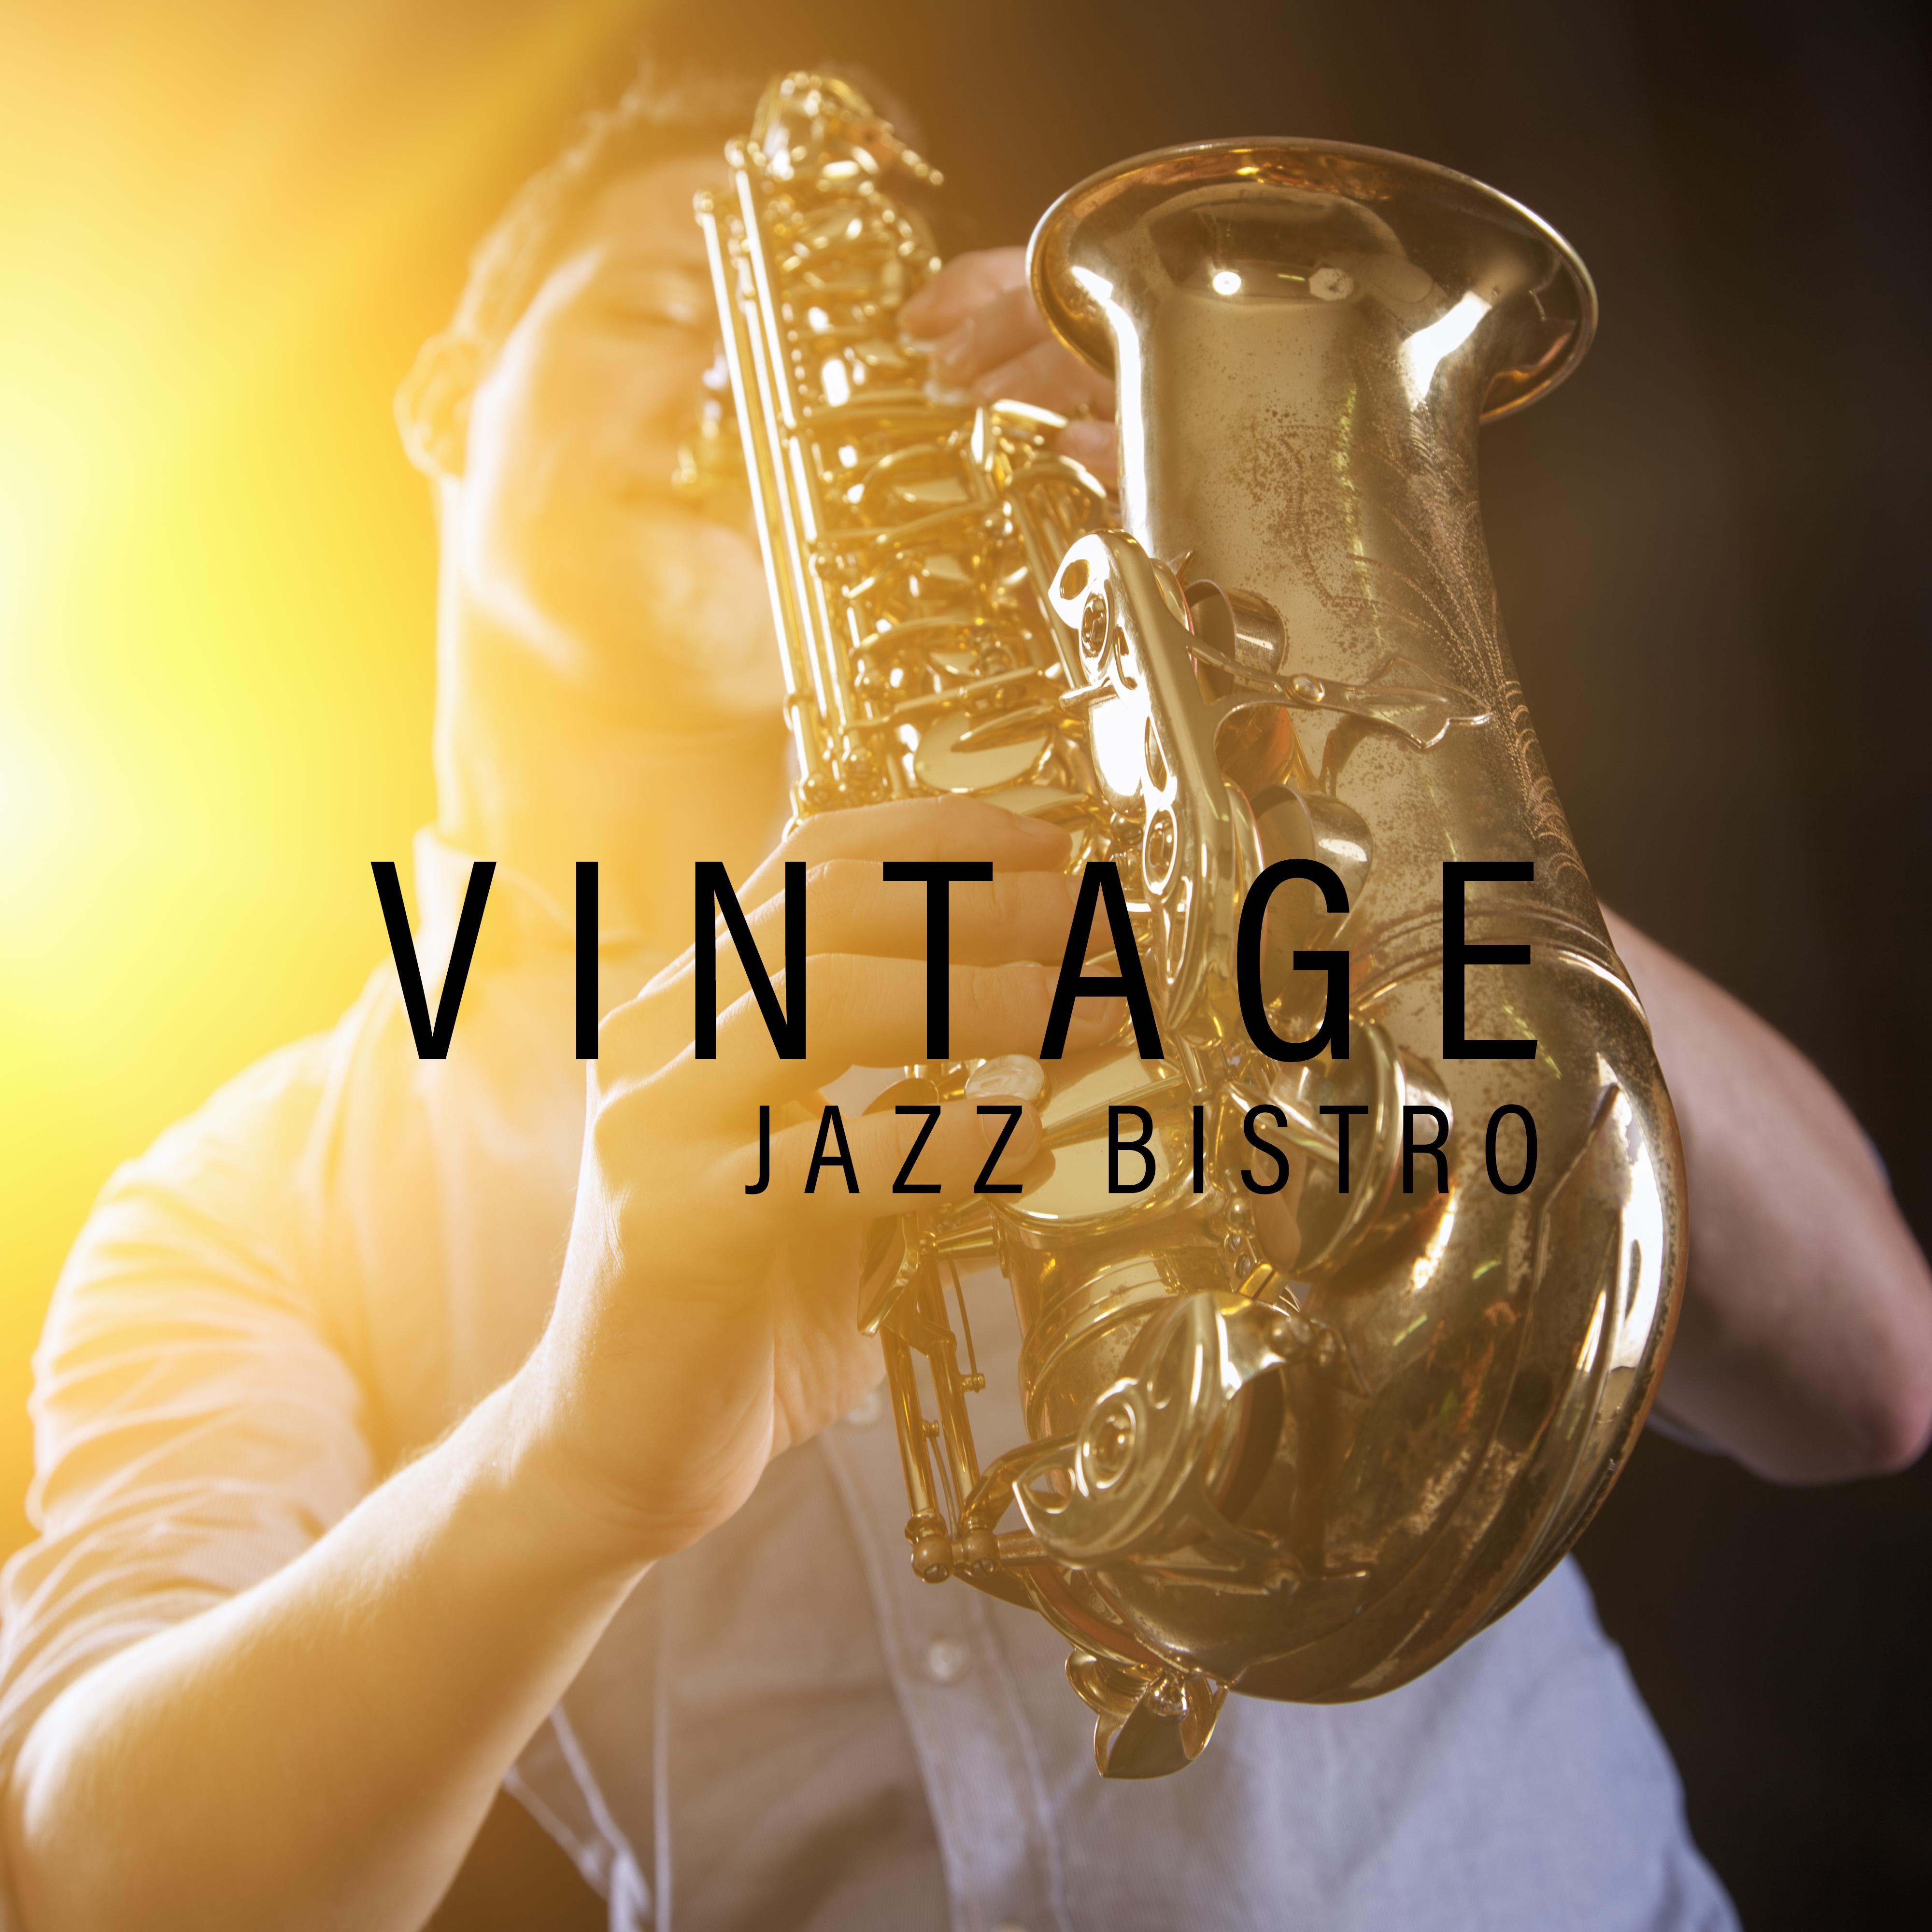 Vintage Jazz Bistro  Relaxing Restaurant Jazz 2019, Coffee Music, Jazz Music Ambient, Vintage Cafe, Relaxing Jazz